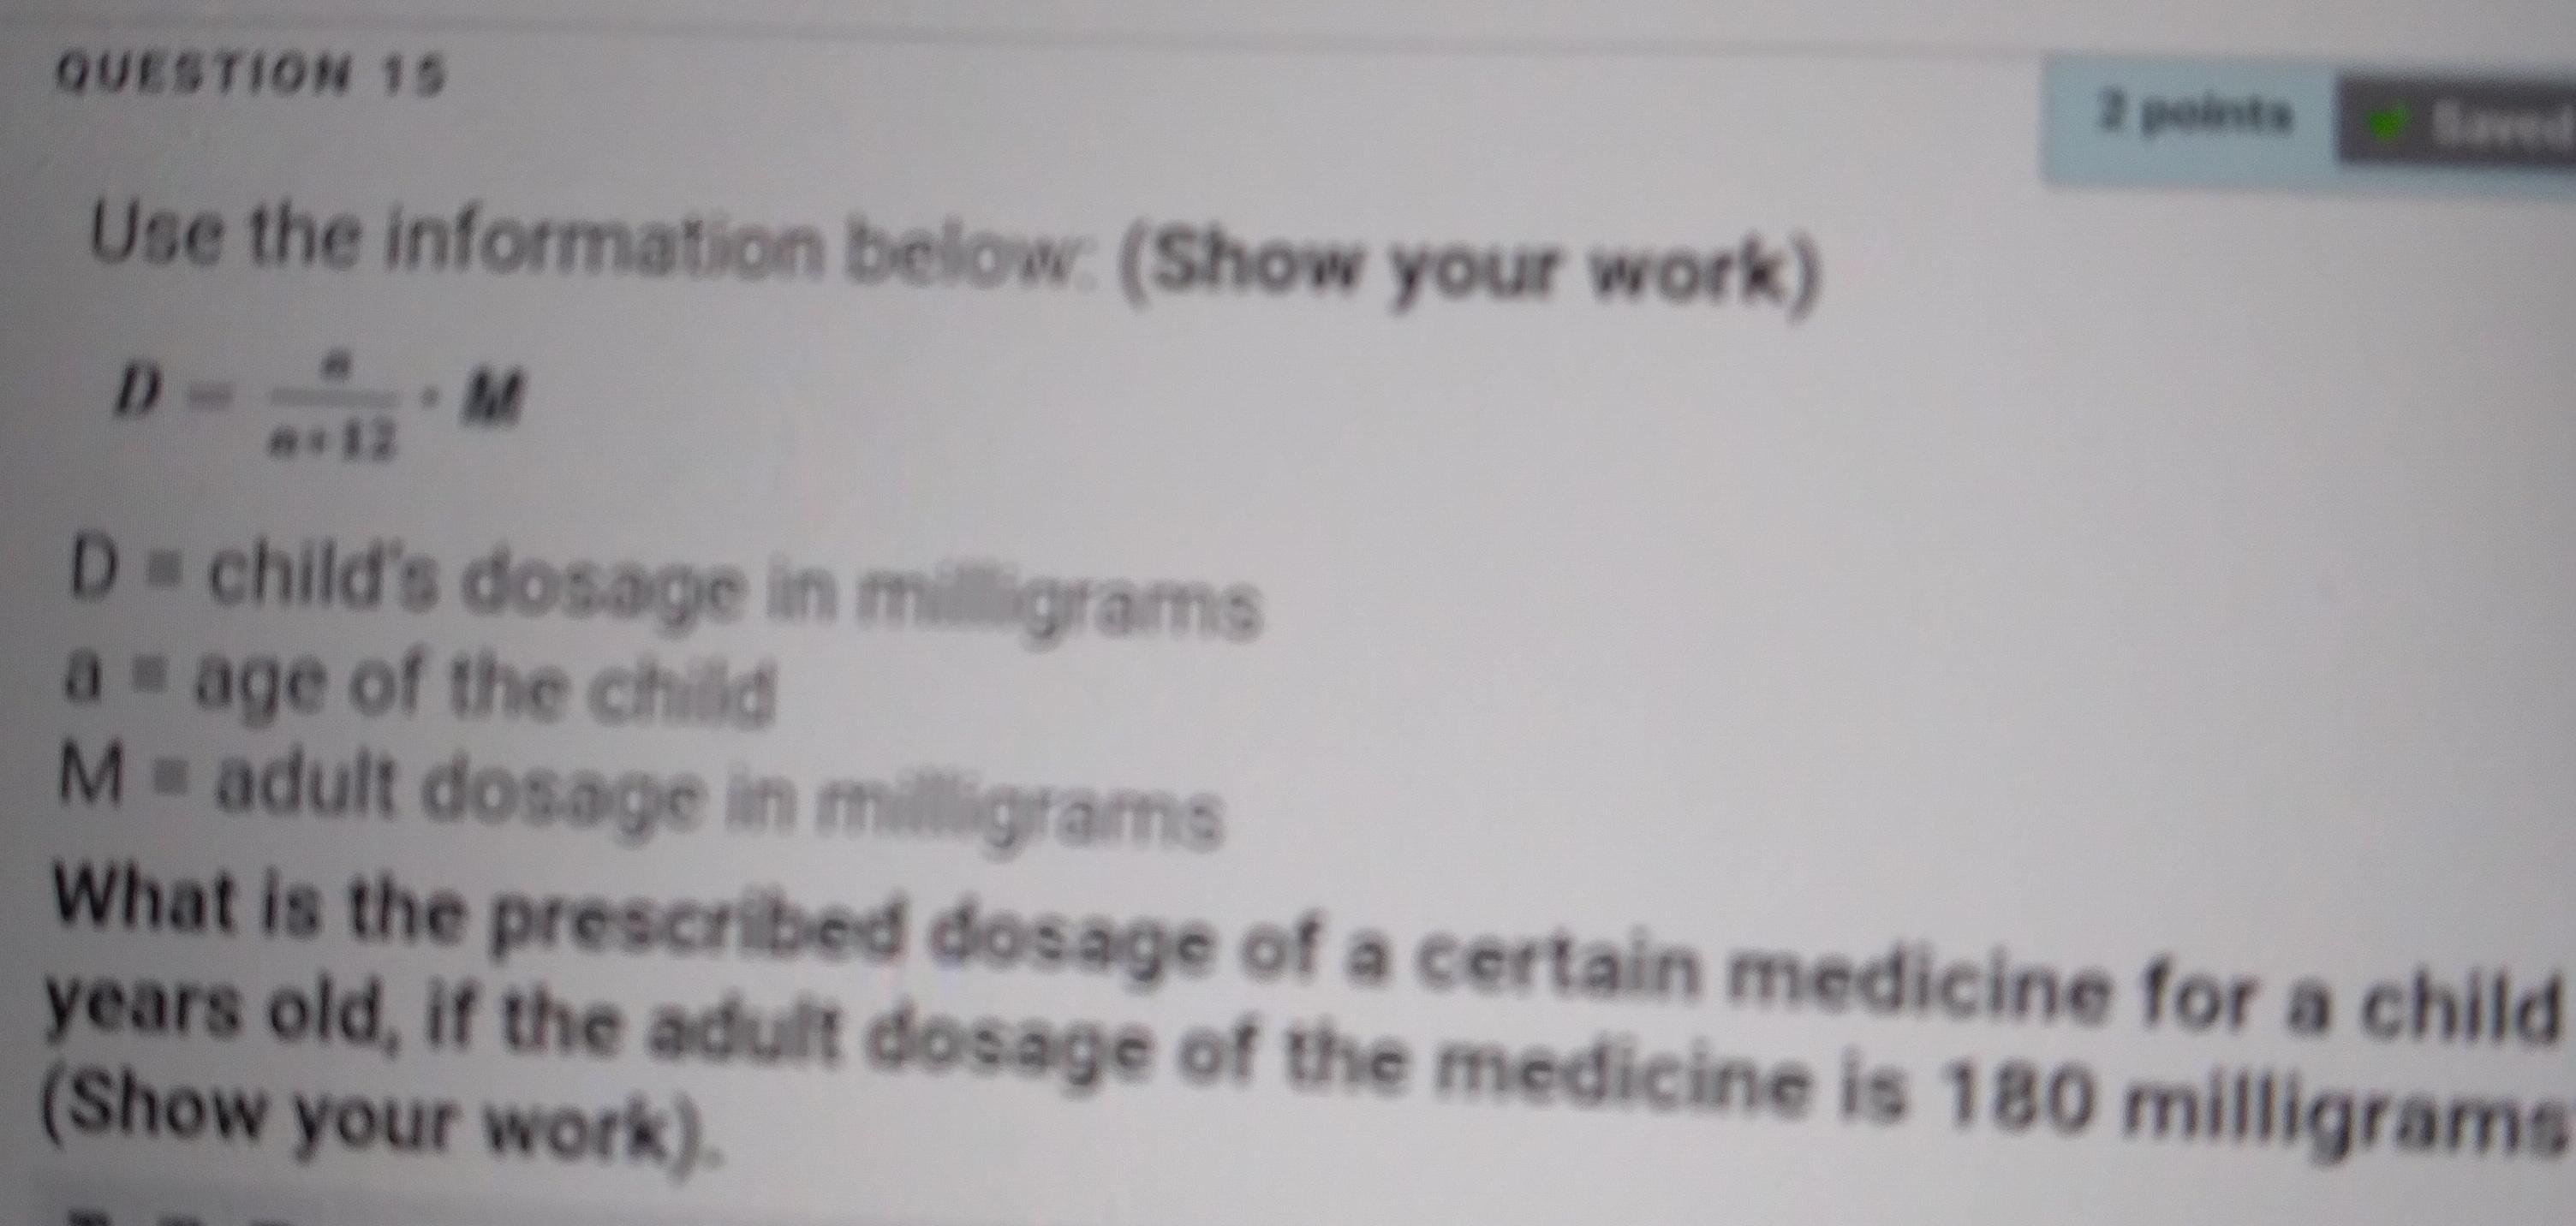 What Is The Prescribed Dosage For A 4 Yr Old Child, If The Adult Dosage Is 180 Milligram